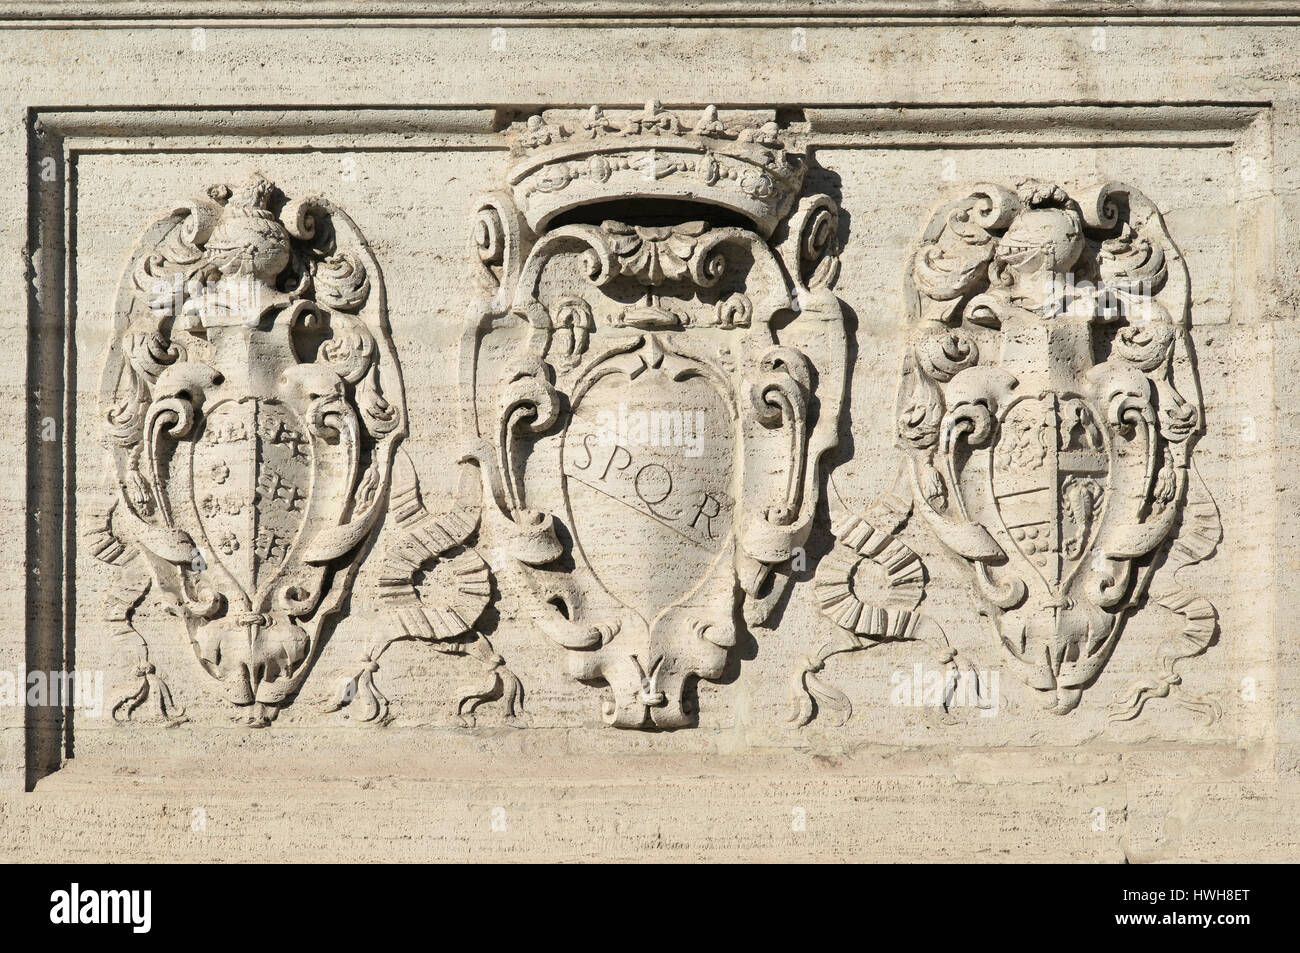 SPQR symbol of Ancient Roman Republic with other old noble emblems on Capitol Hill monumental staircase in Rome Stock Photo